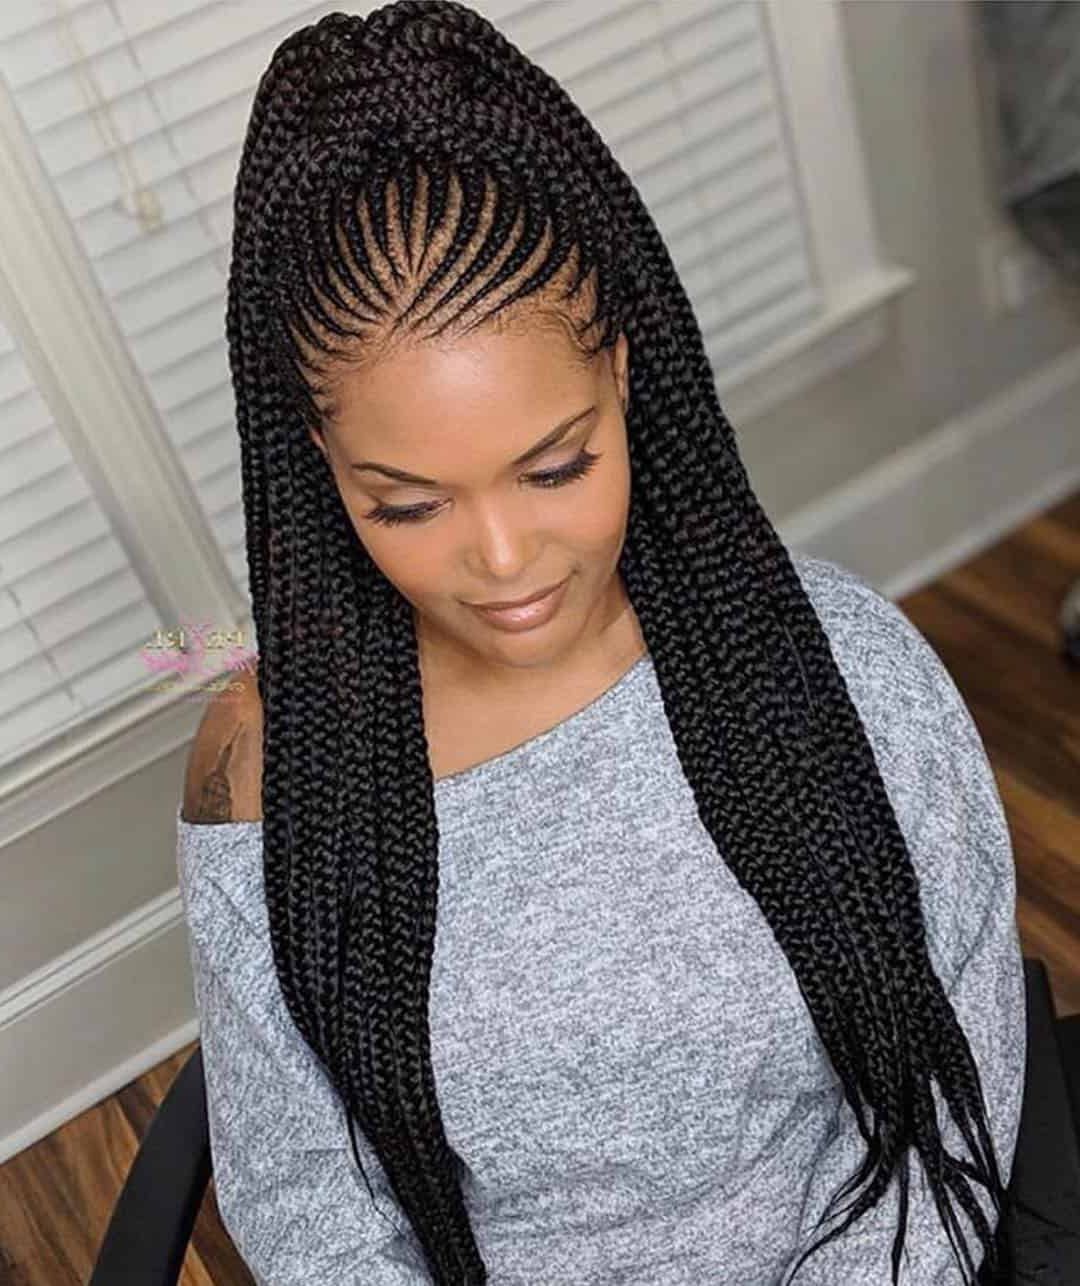 27 Lovely Lemonade Braids To Refresh Your Look – Wild About Within Famous Lemon Tinted Lemonade Braided Hairstyles (View 13 of 20)